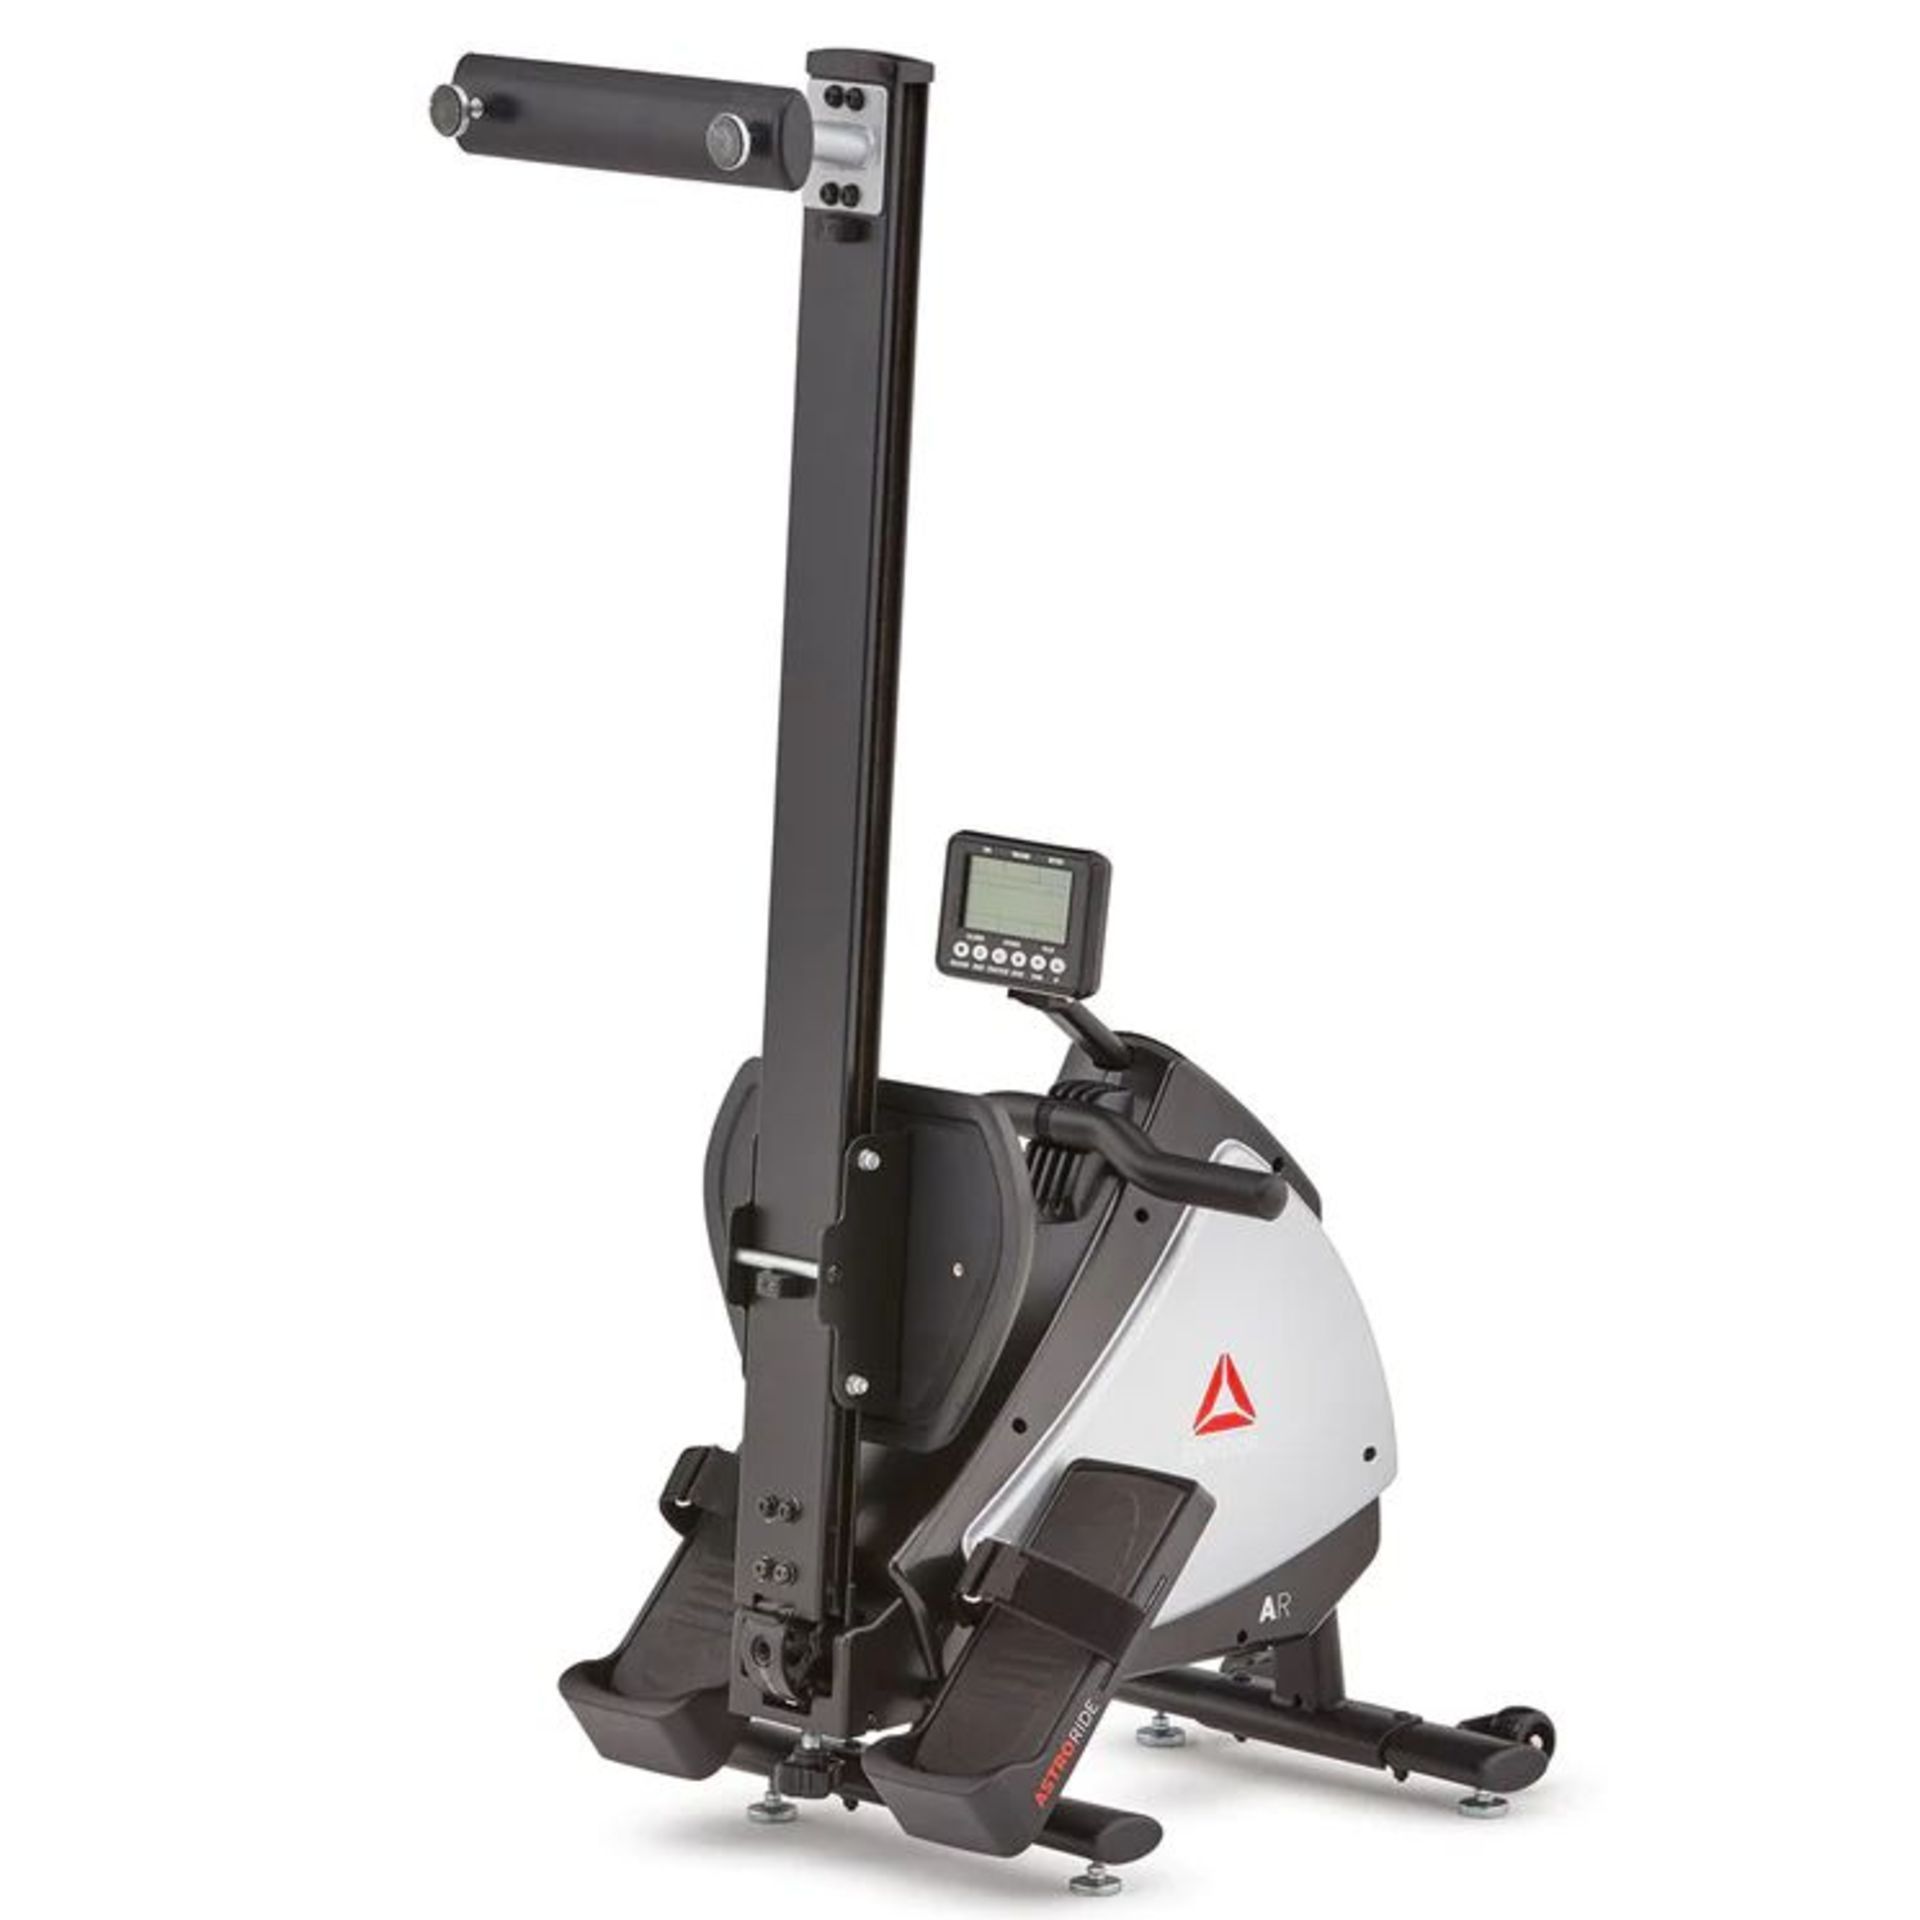 BRAND NEW REEBOK AR Rower. RRP £514.99 EACH R7-6. Designed for you to create more effective and - Image 2 of 4